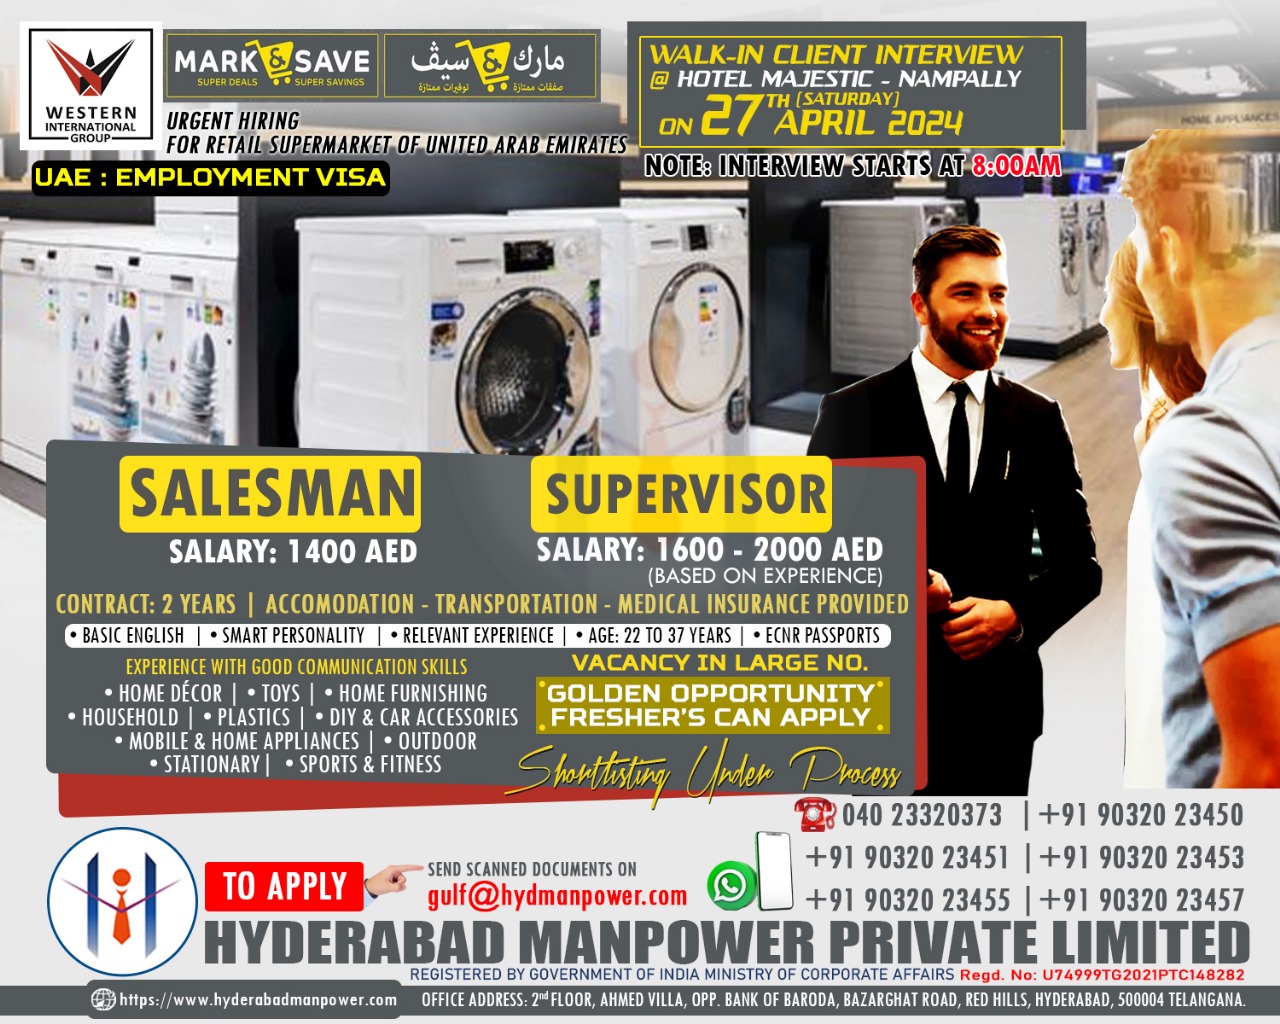 Client Interview in Hyderabad on 27th April 2024